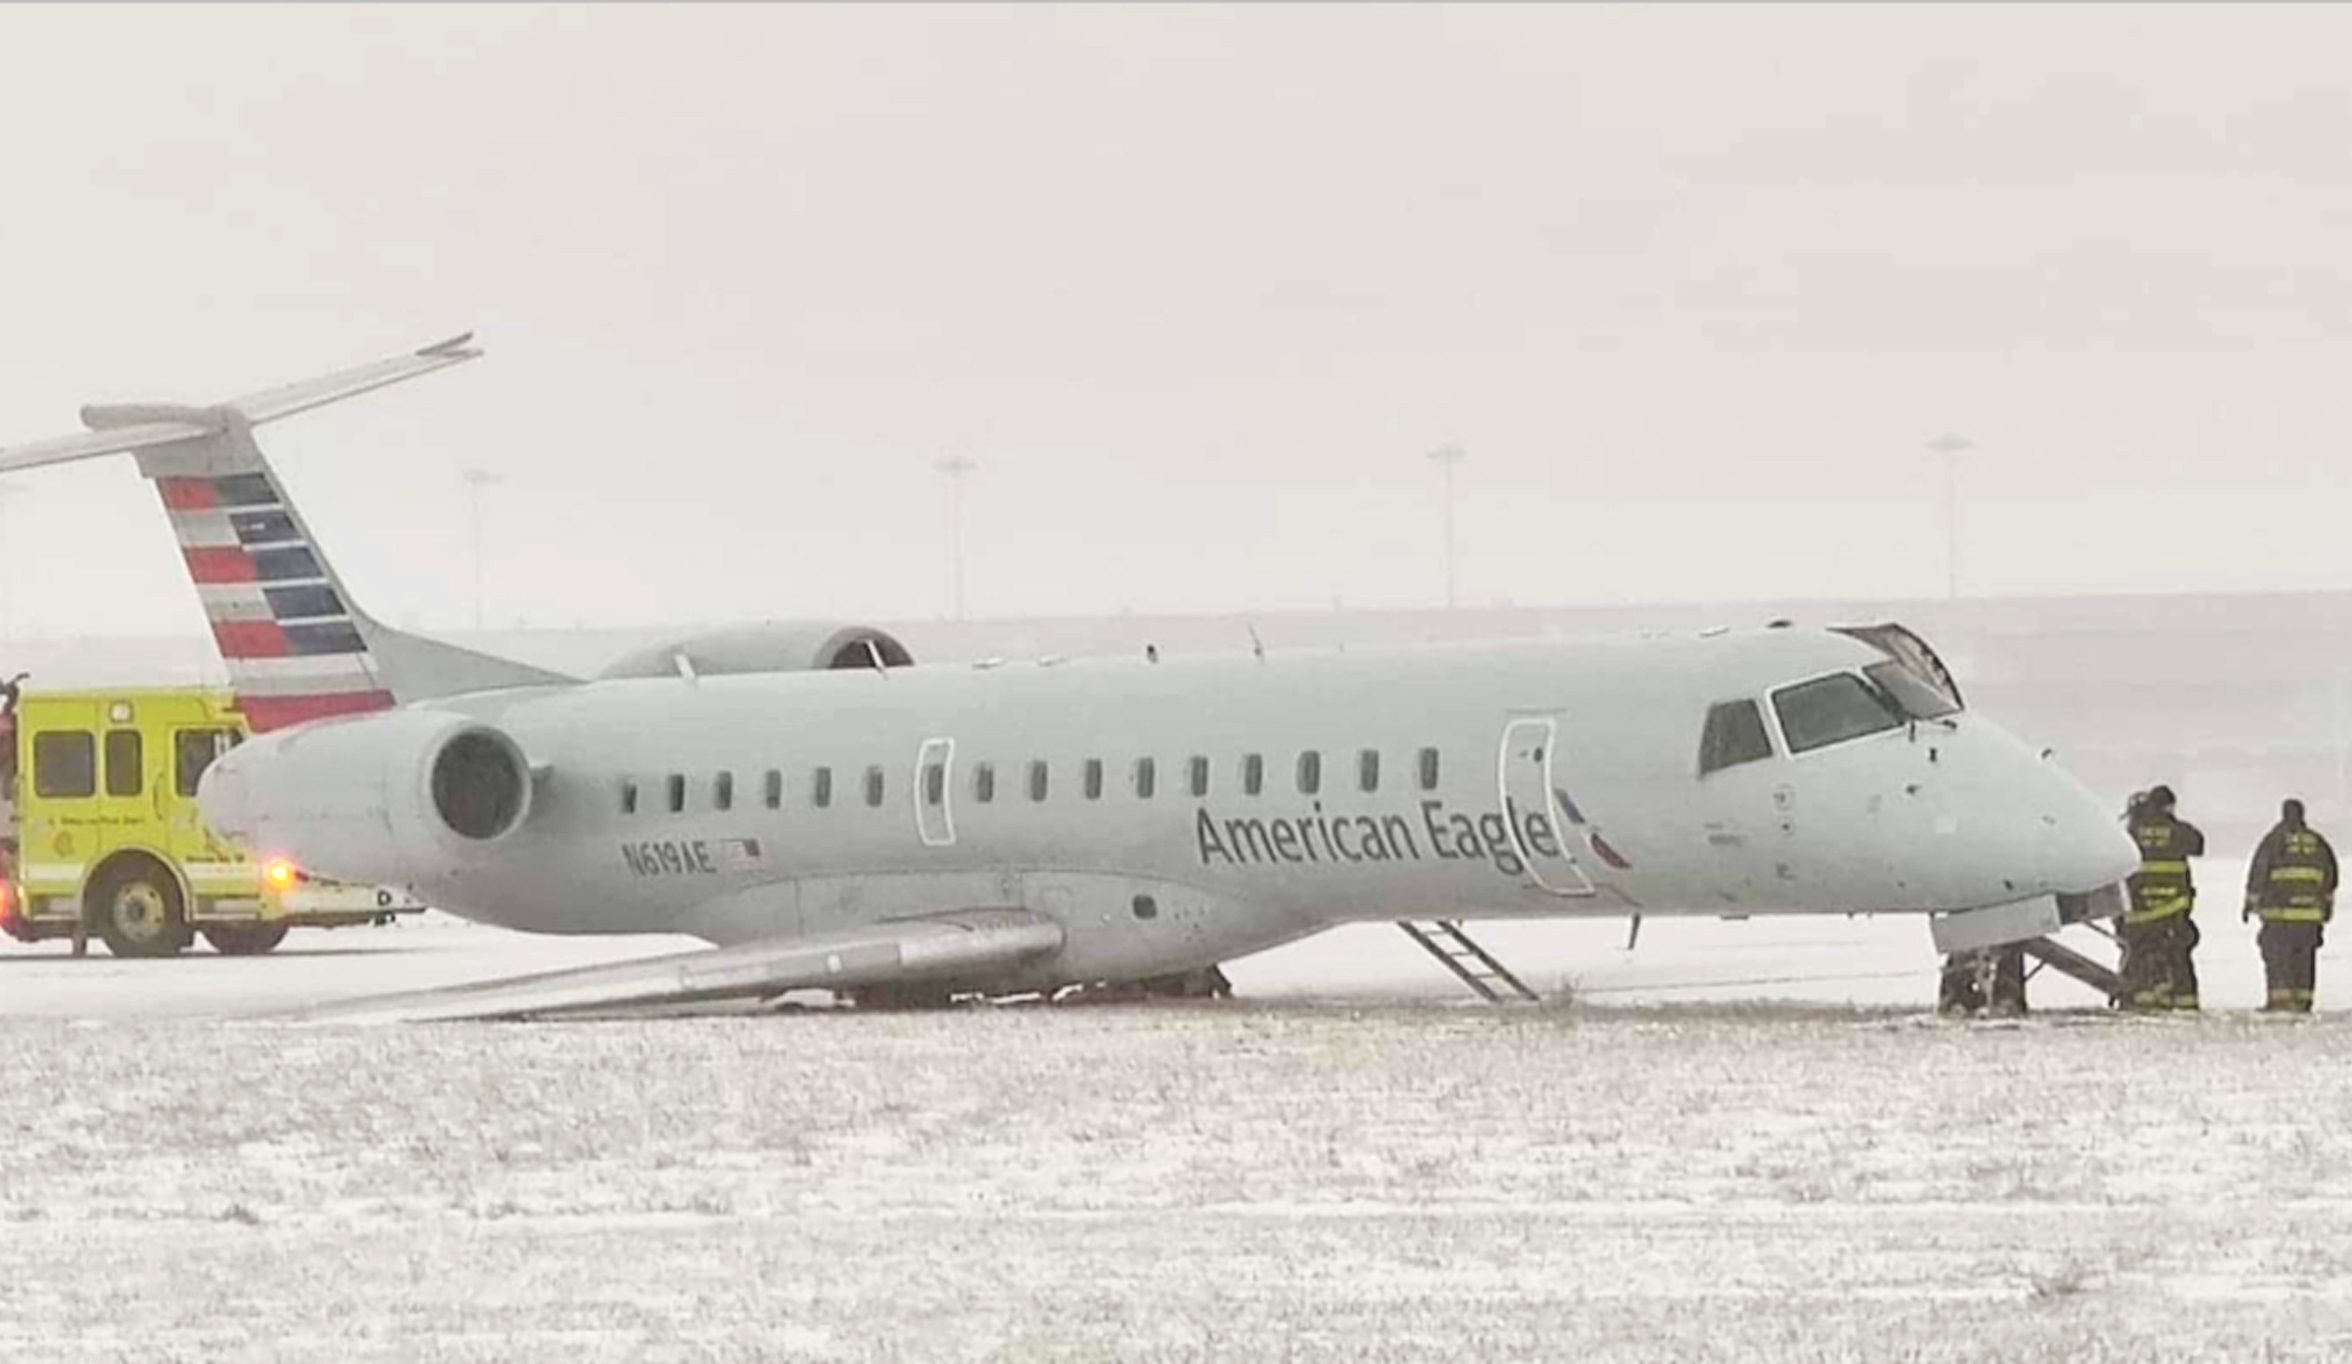 An American Eagle flight slipped off the runway after landing at O’Hare Airport Monday morning. 